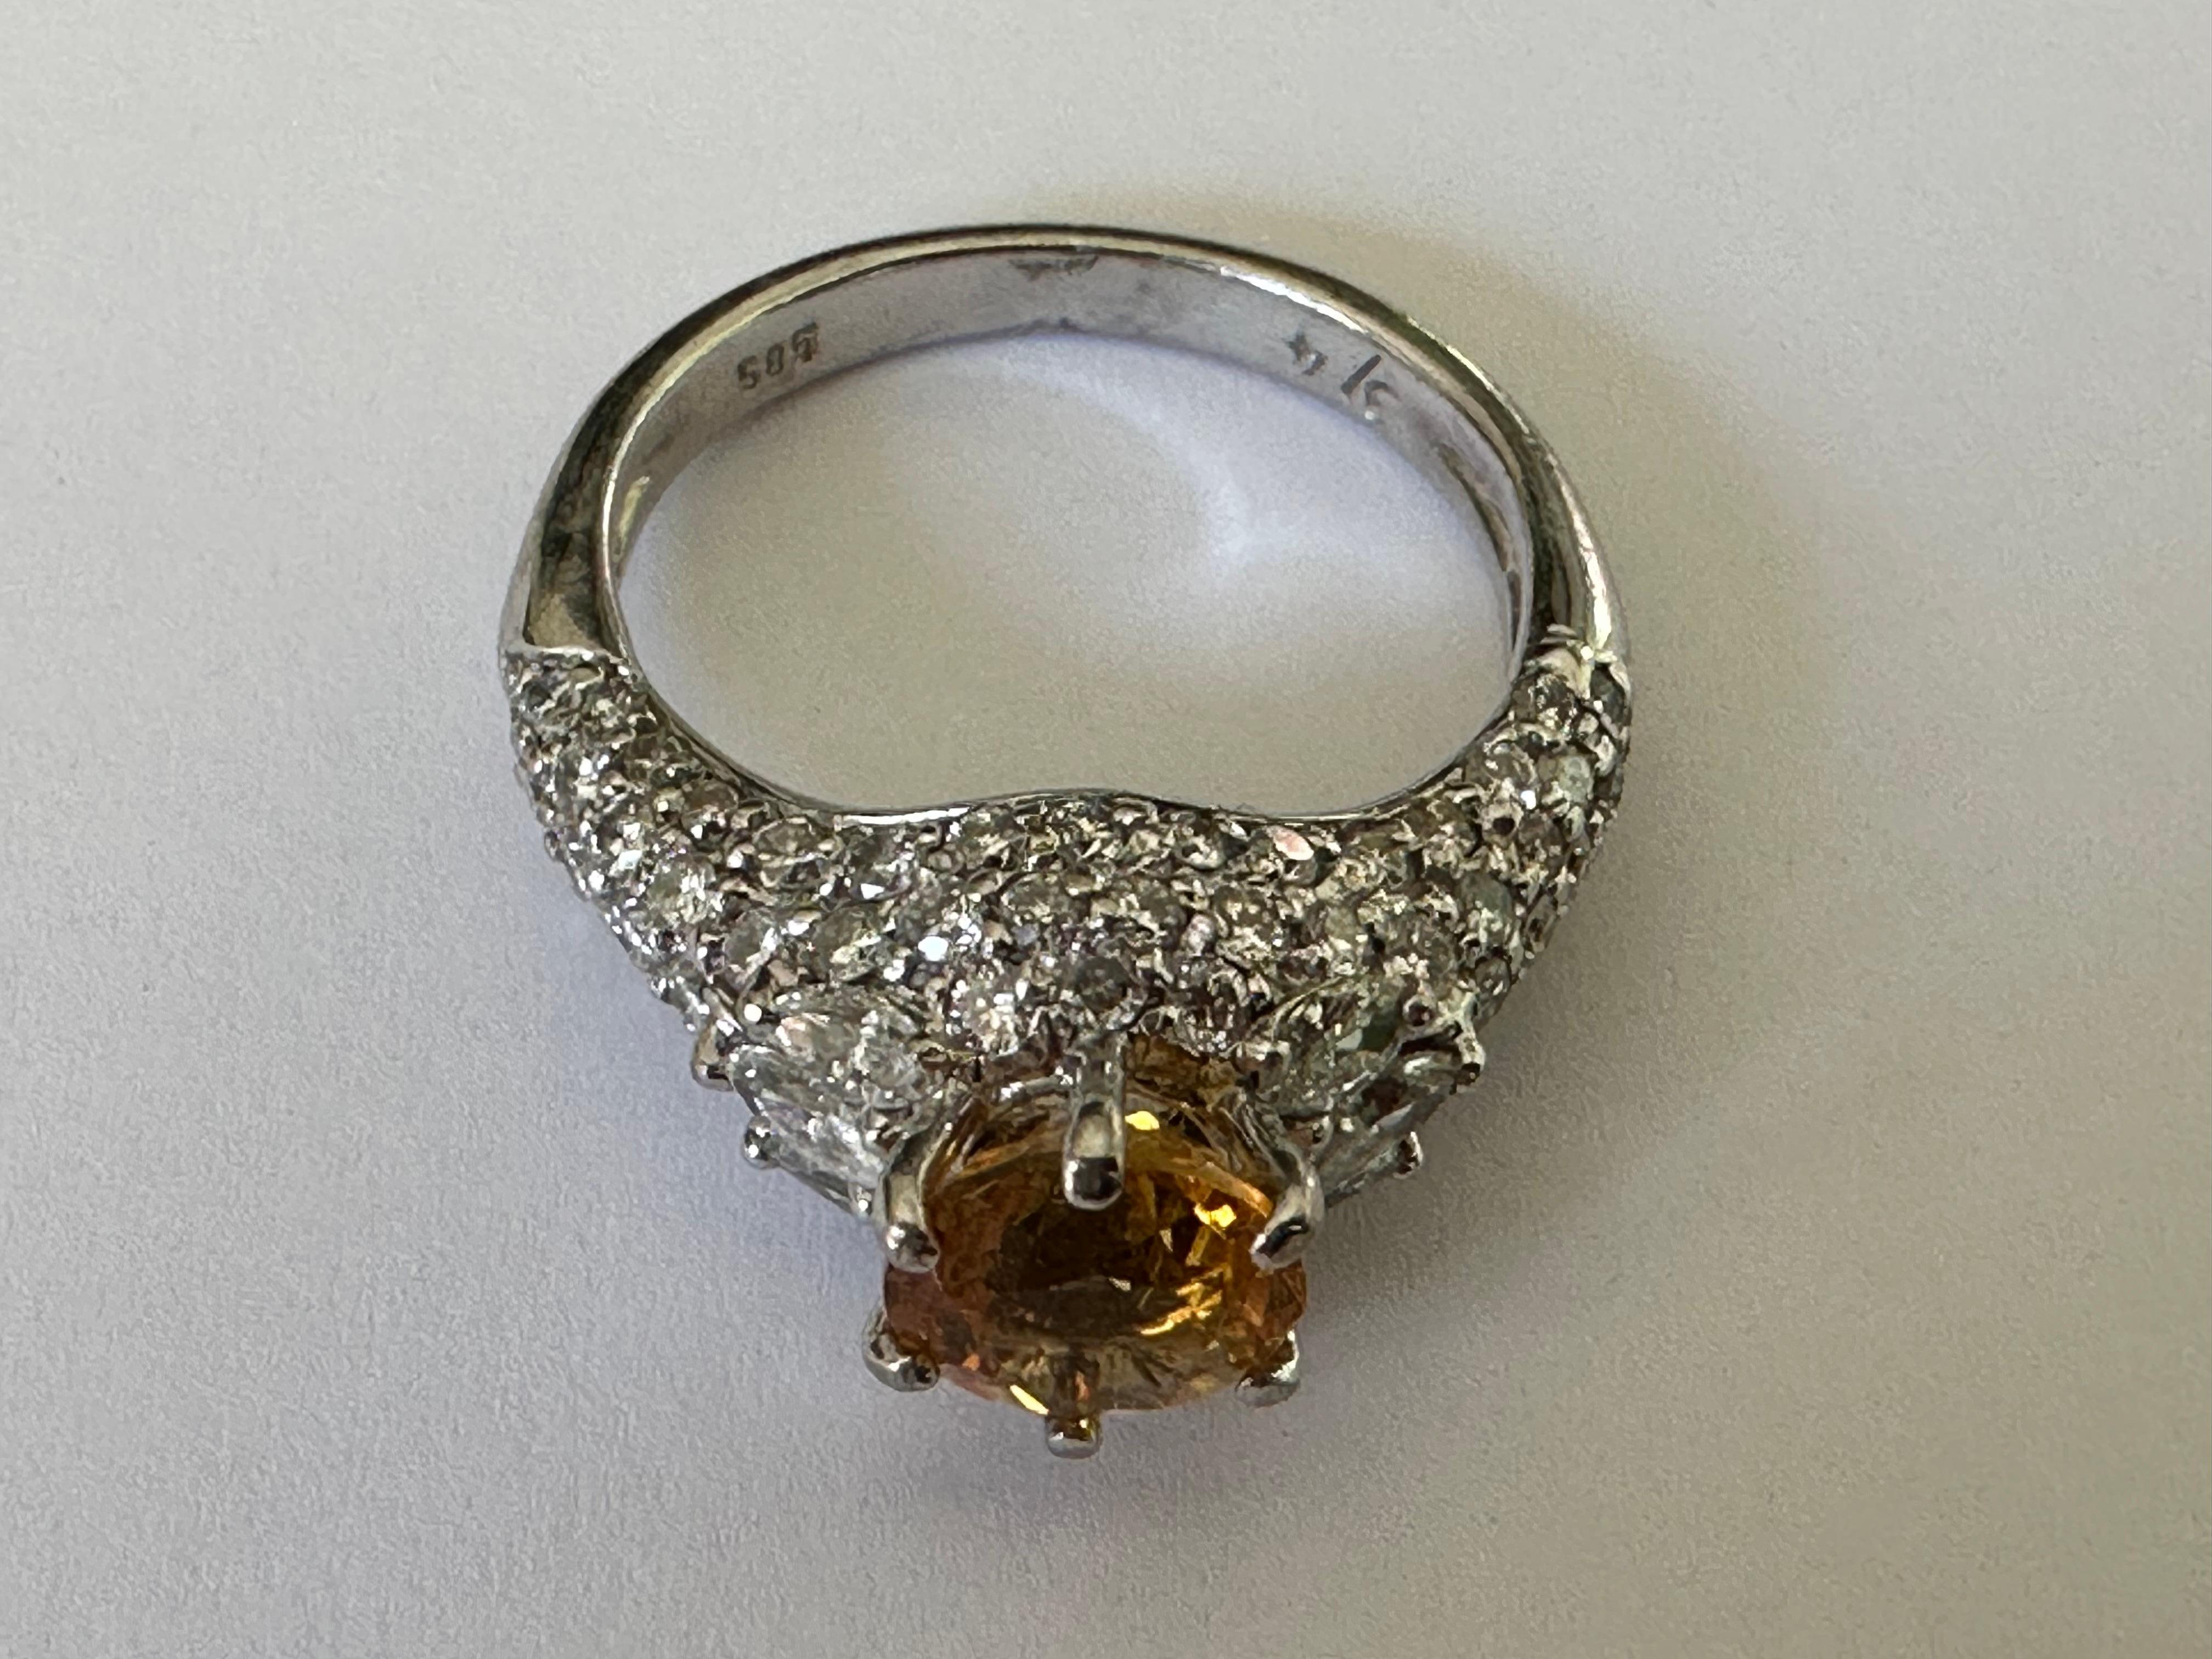 This beautiful round-shaped 6.5mm orange-yellow sapphire center stone is accented by approximately 0.75 carats of pavé set round brilliant-cut and marquise diamonds and set in 14K white gold.

